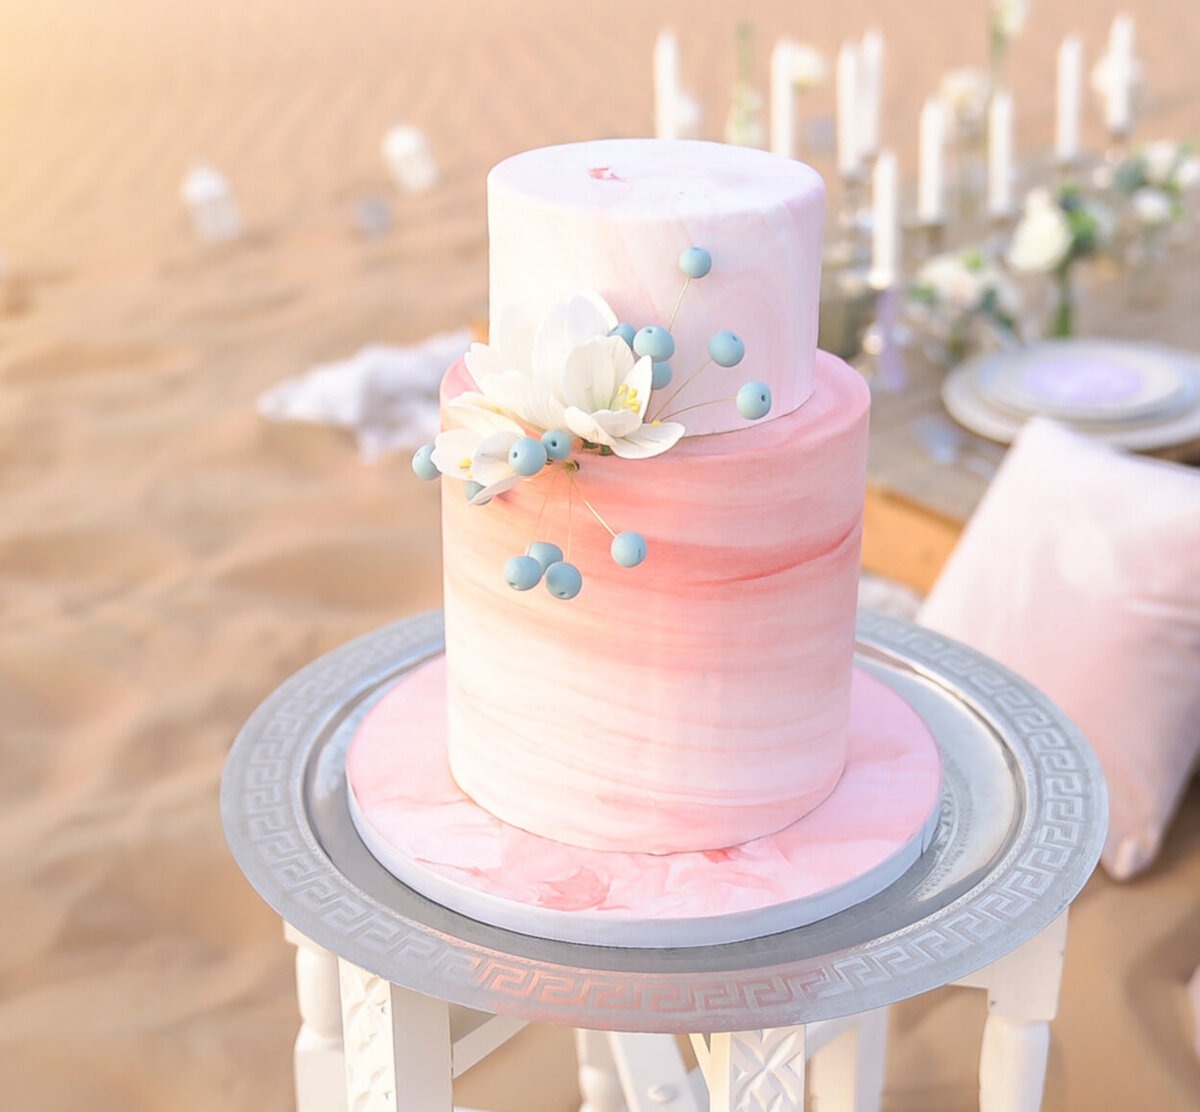 Two-tier wedding cake inspired by the movement of dunes, decorated with floral ornaments for desert elopement shoot in Dubai organized by Lovely & Planned